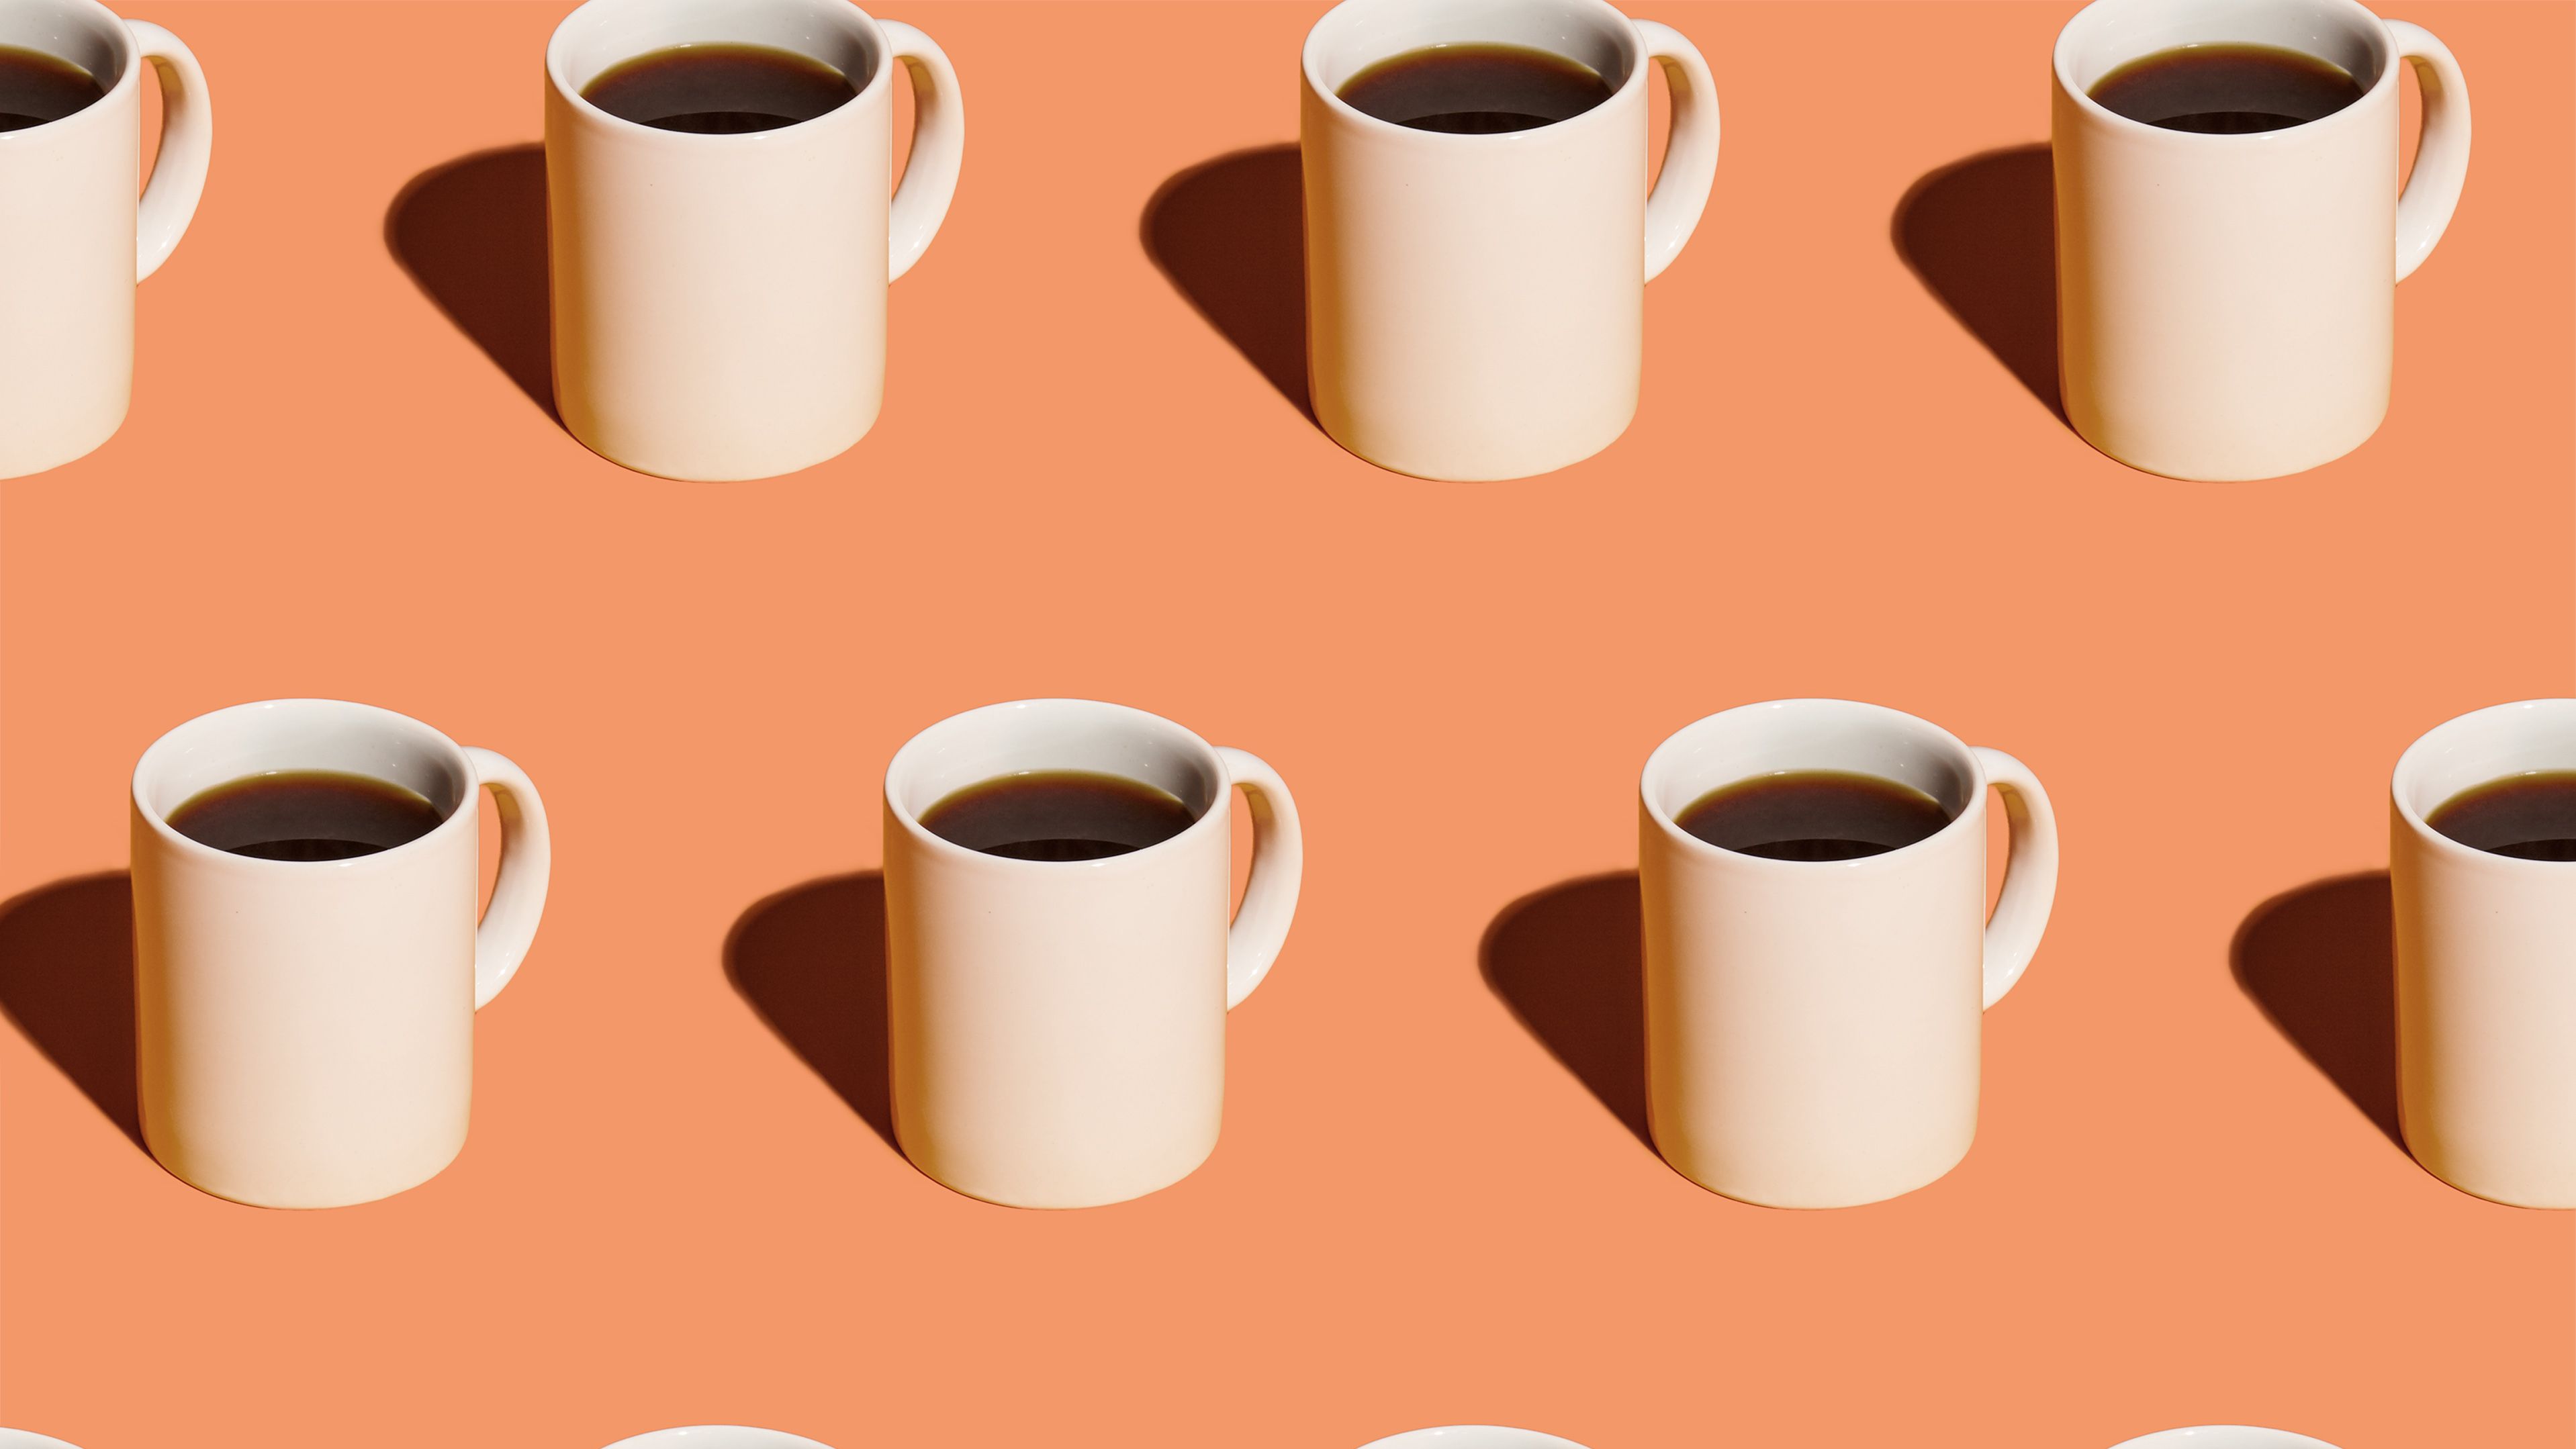 https://hips.hearstapps.com/hmg-prod/images/mugs-of-black-coffee-in-rows-against-peach-royalty-free-image-1584741659.jpg?crop=1xw:0.43155xh;center,top